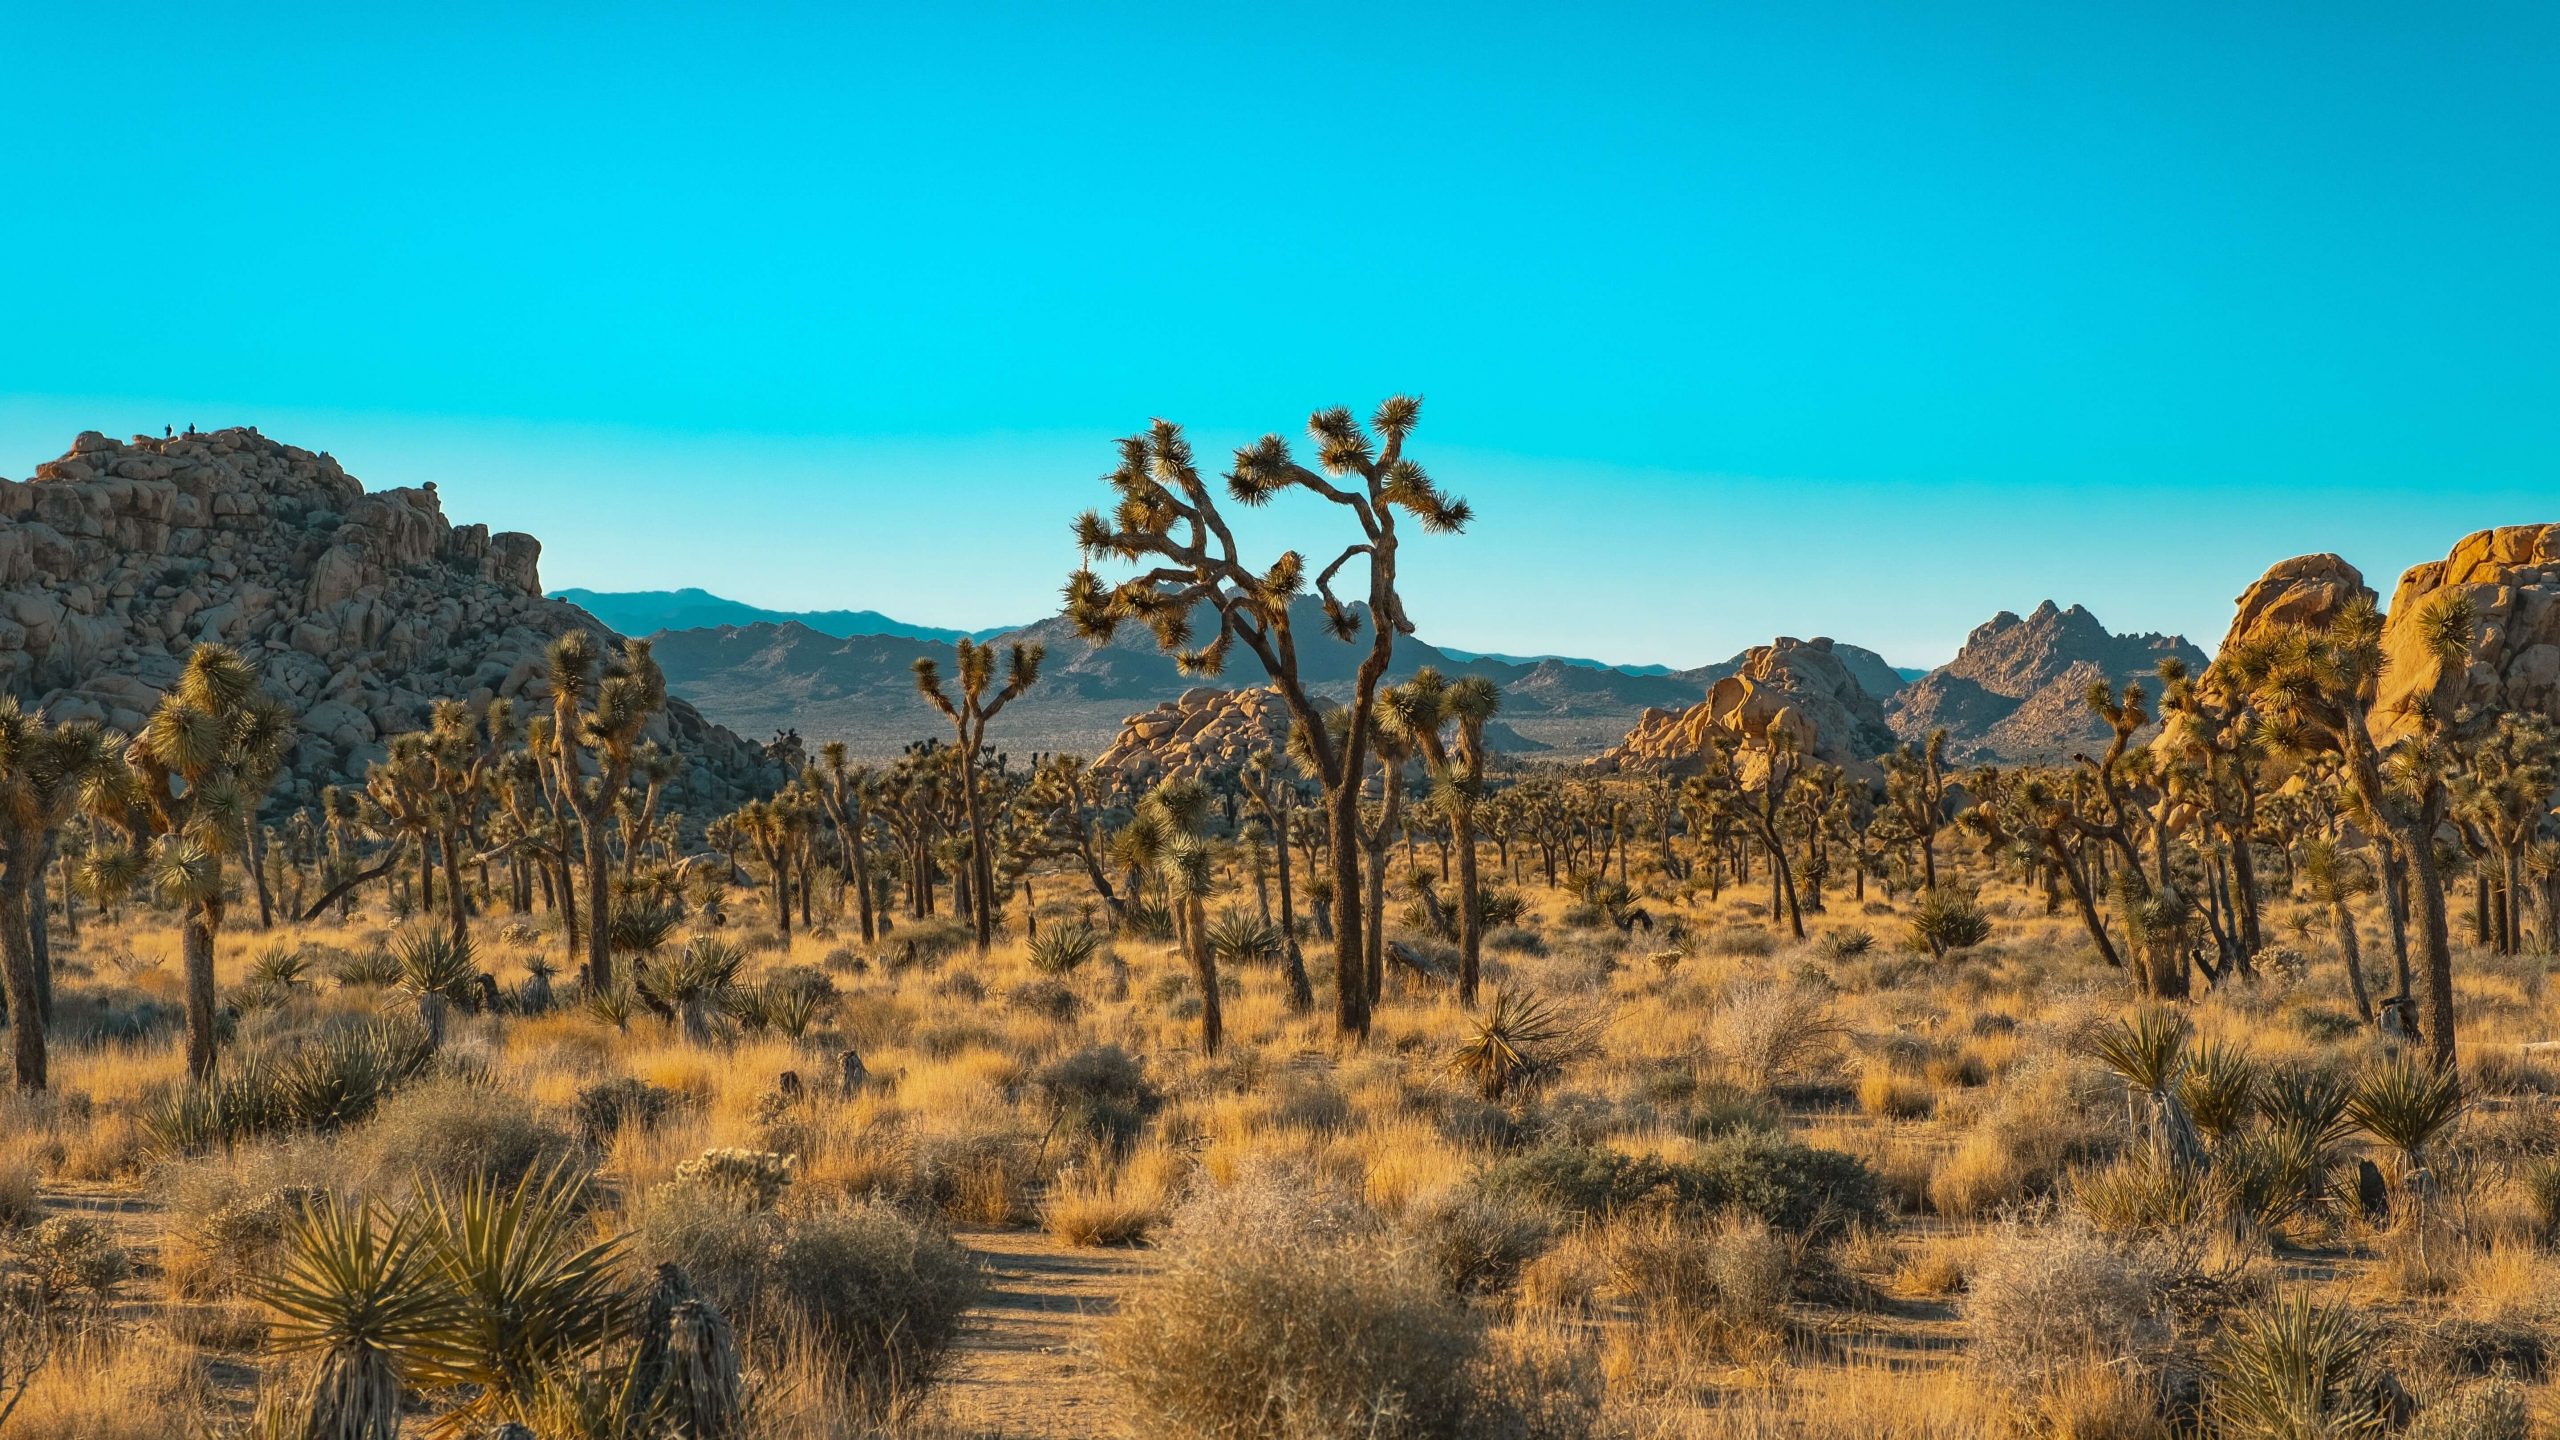 What is the entrance fee for Joshua Tree National Park?